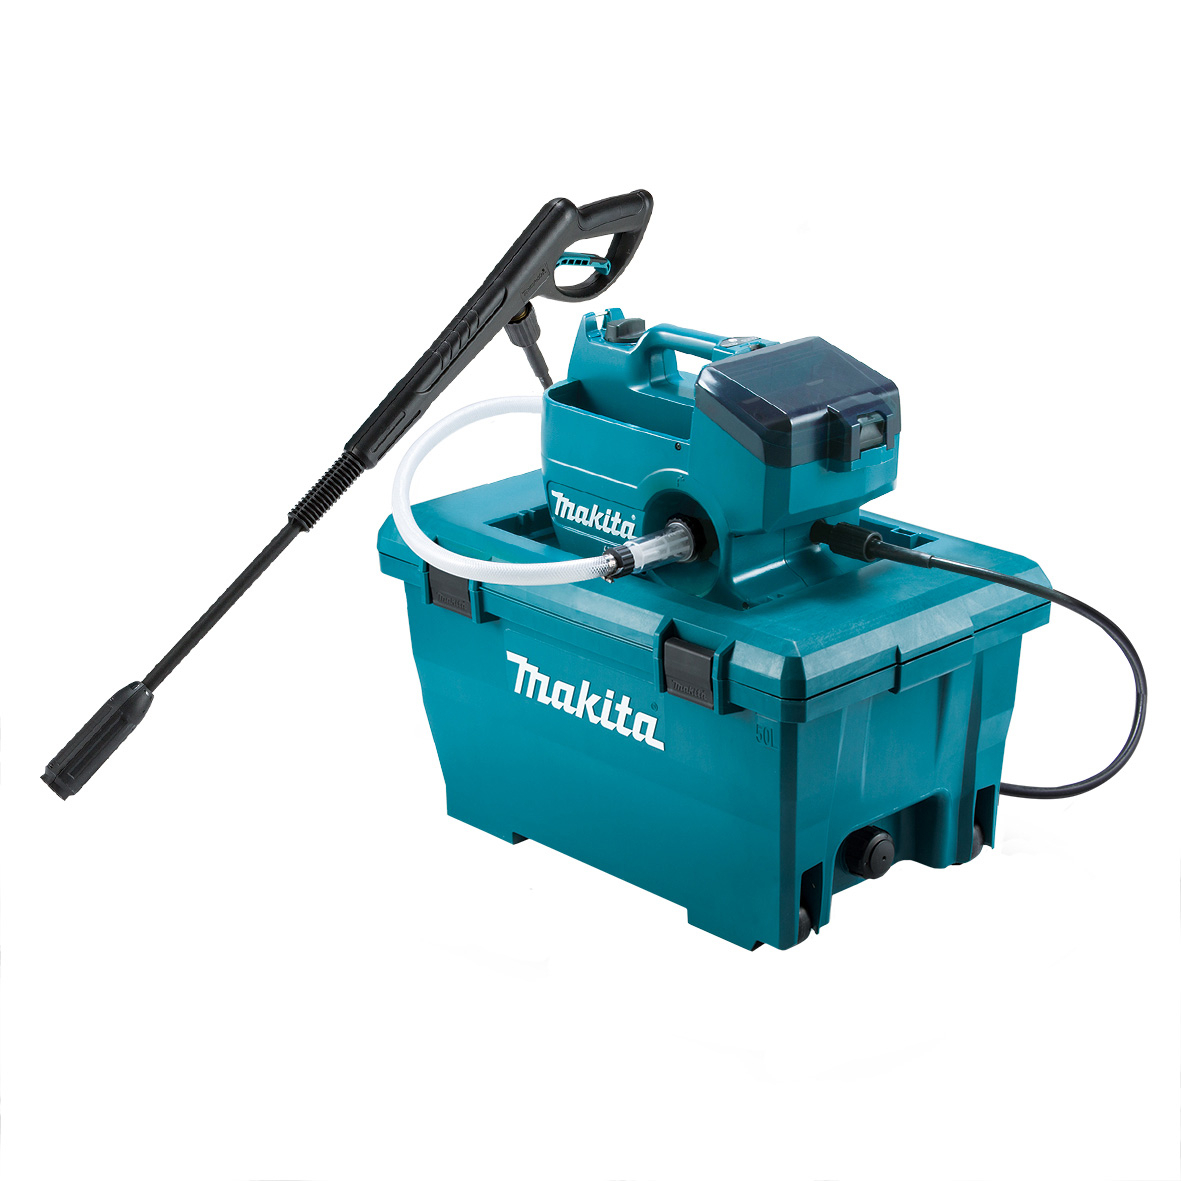 Makita 18Vx2 Brushless Pressure Washer (tool only) DHW080ZK